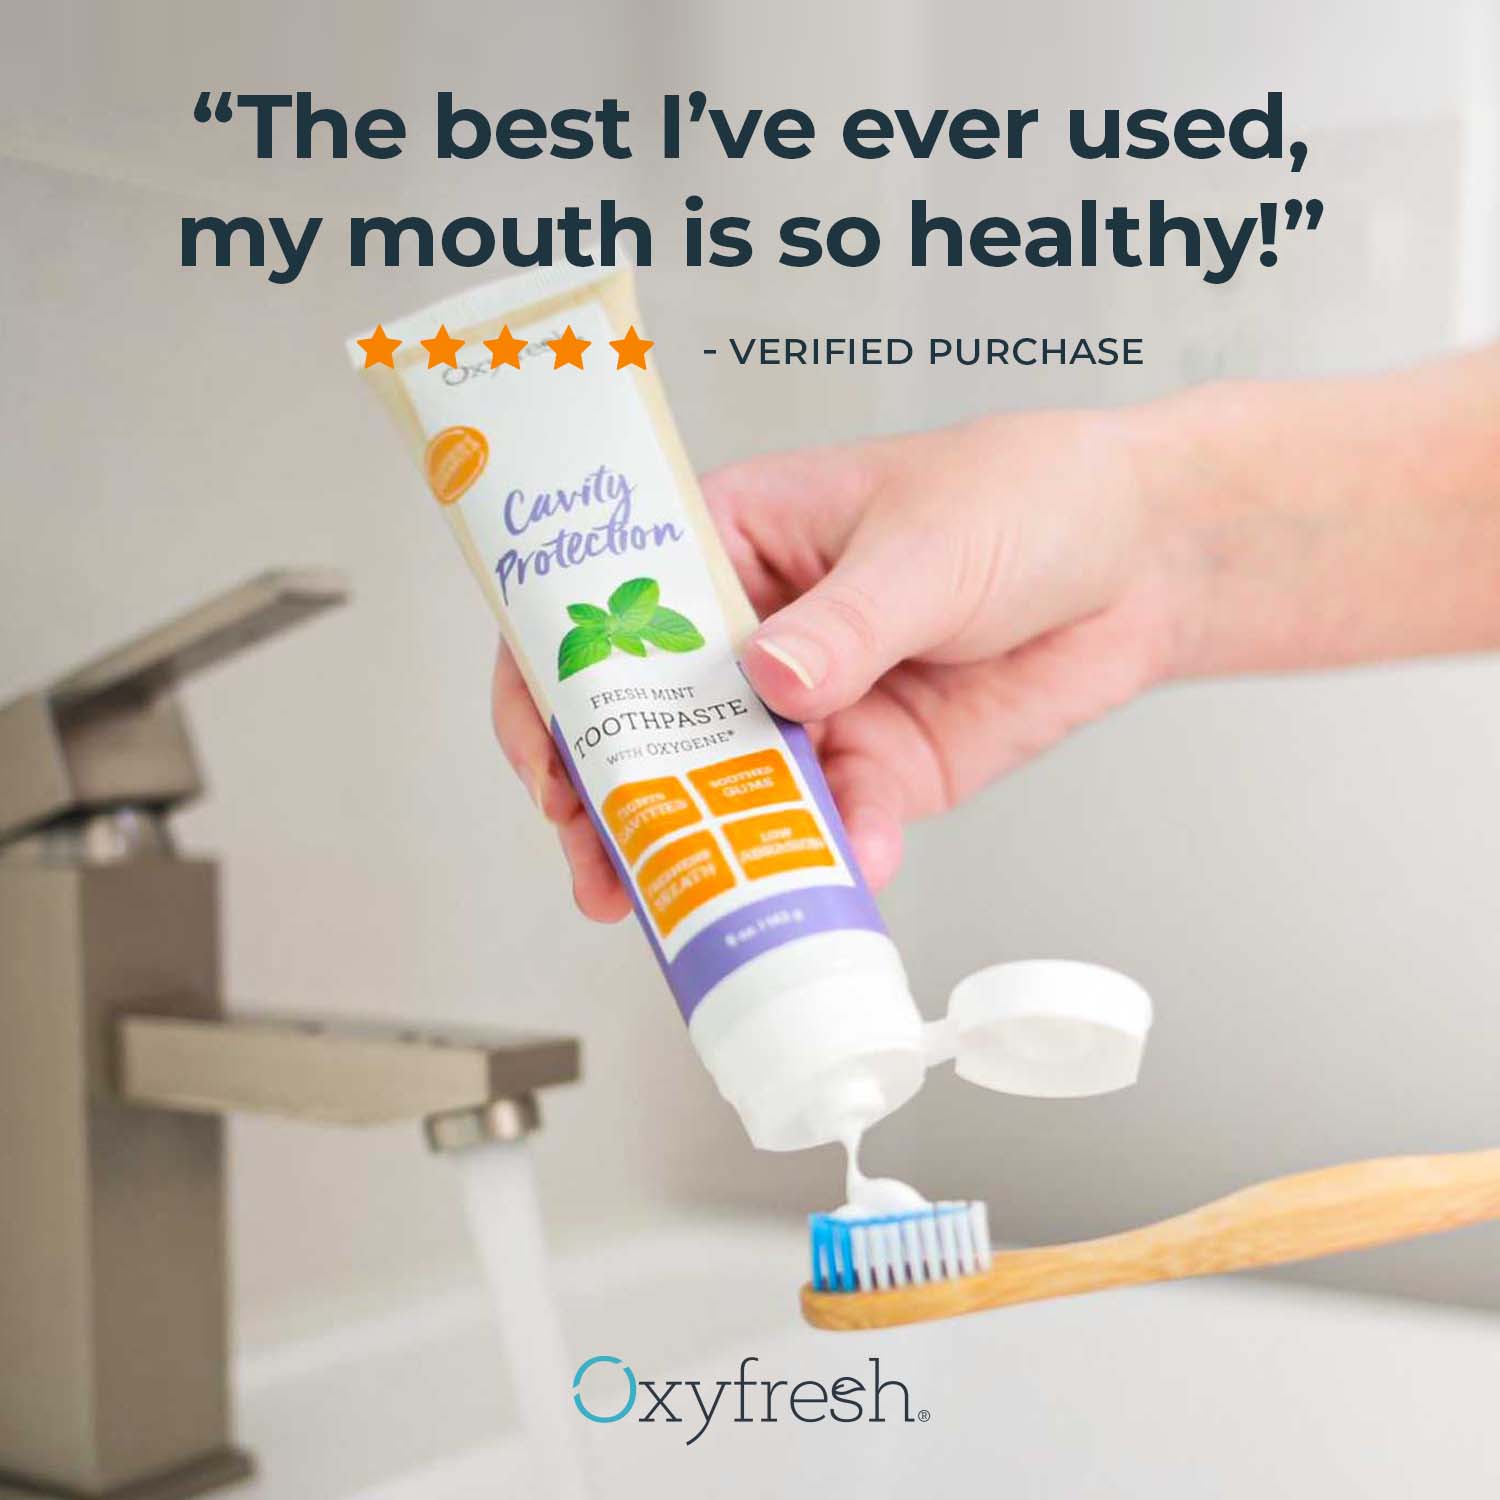 oxyfresh-cavity-protection-fluoride-toothpaste-review-"The-best-I've-ever-used,-my-mouth-is-so-healthy!"